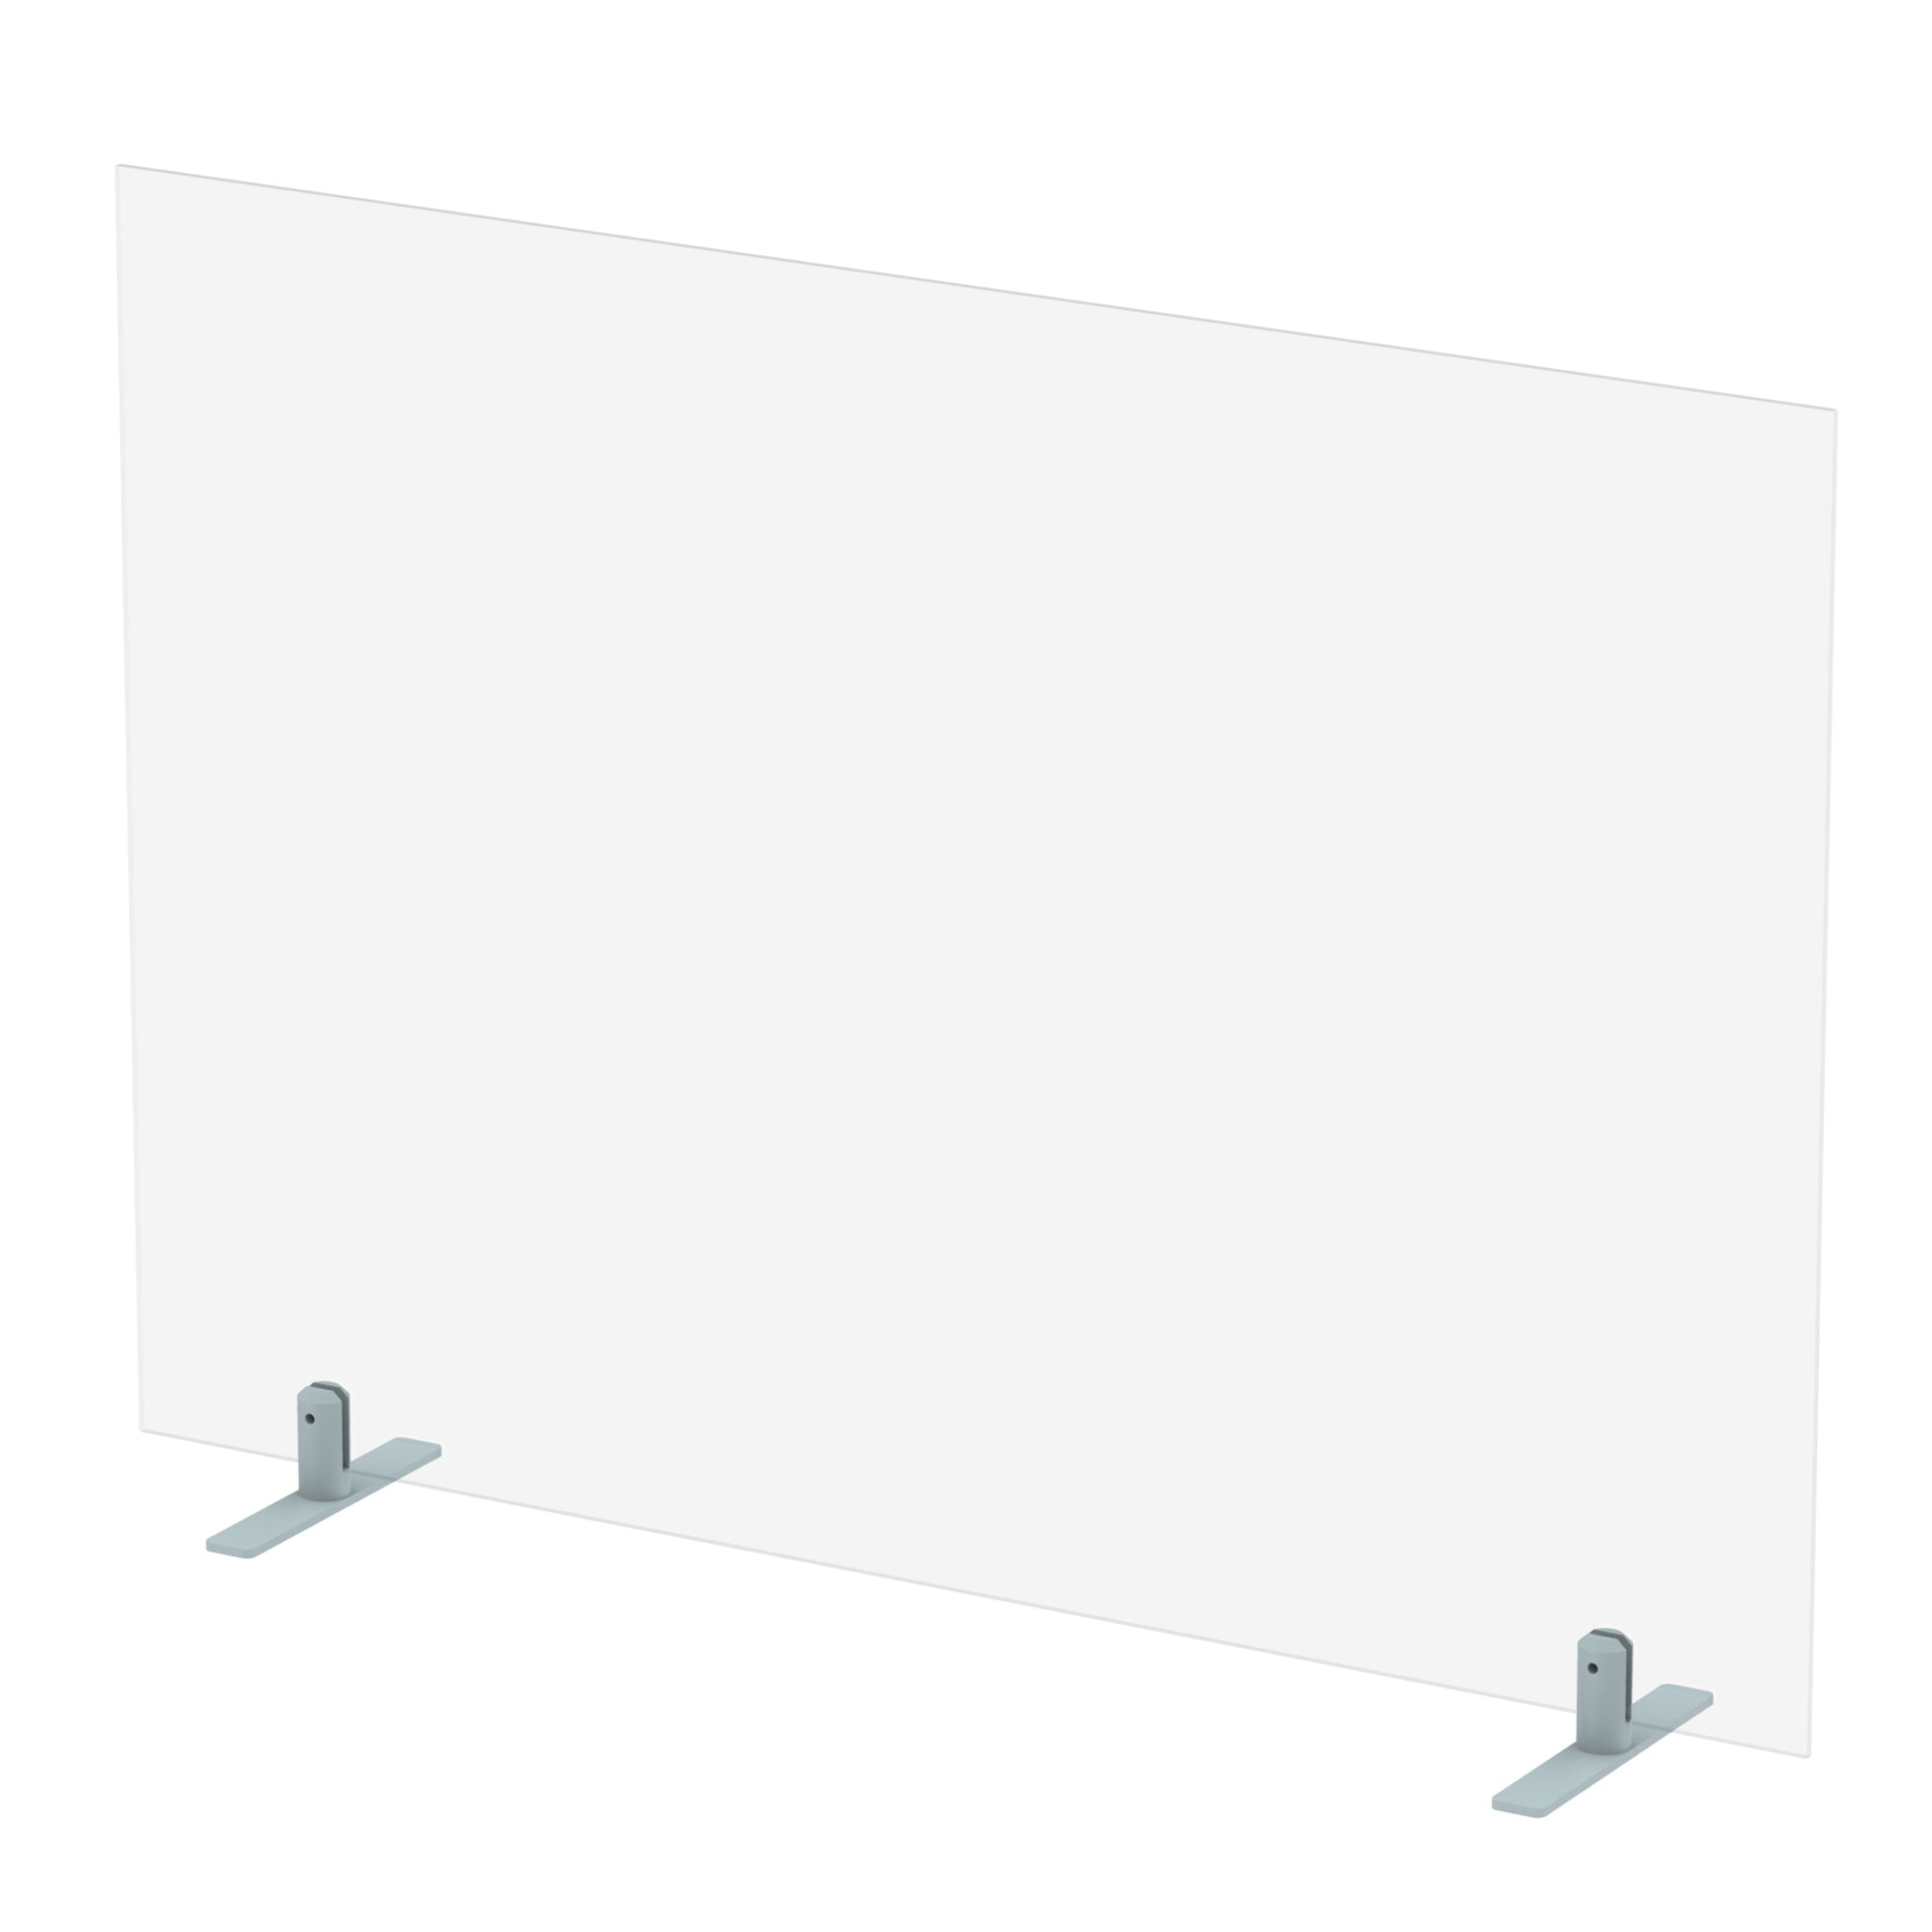 Dynamic Protect Plus Acrylic Desktop Screen - Rectangular, Self-Assembly, 2-Year Guarantee, Various Sizes (W: 800-1800mm, H: 700mm, D: 5mm)